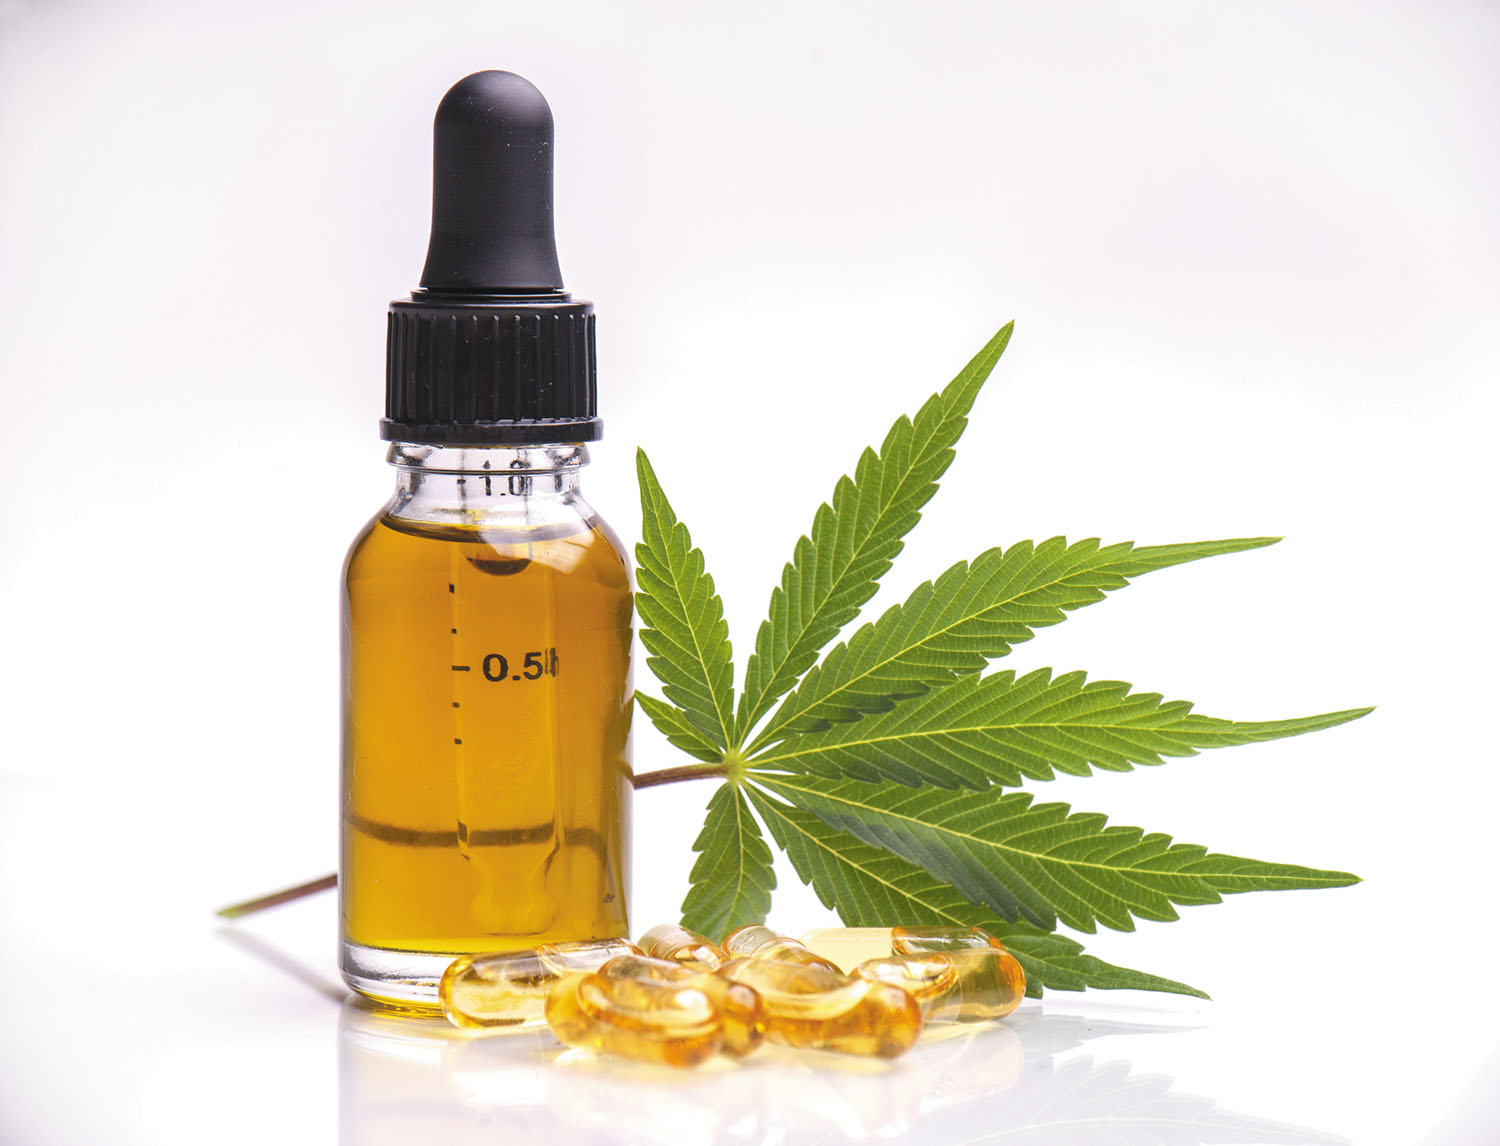 What are the health benefits of CBD?